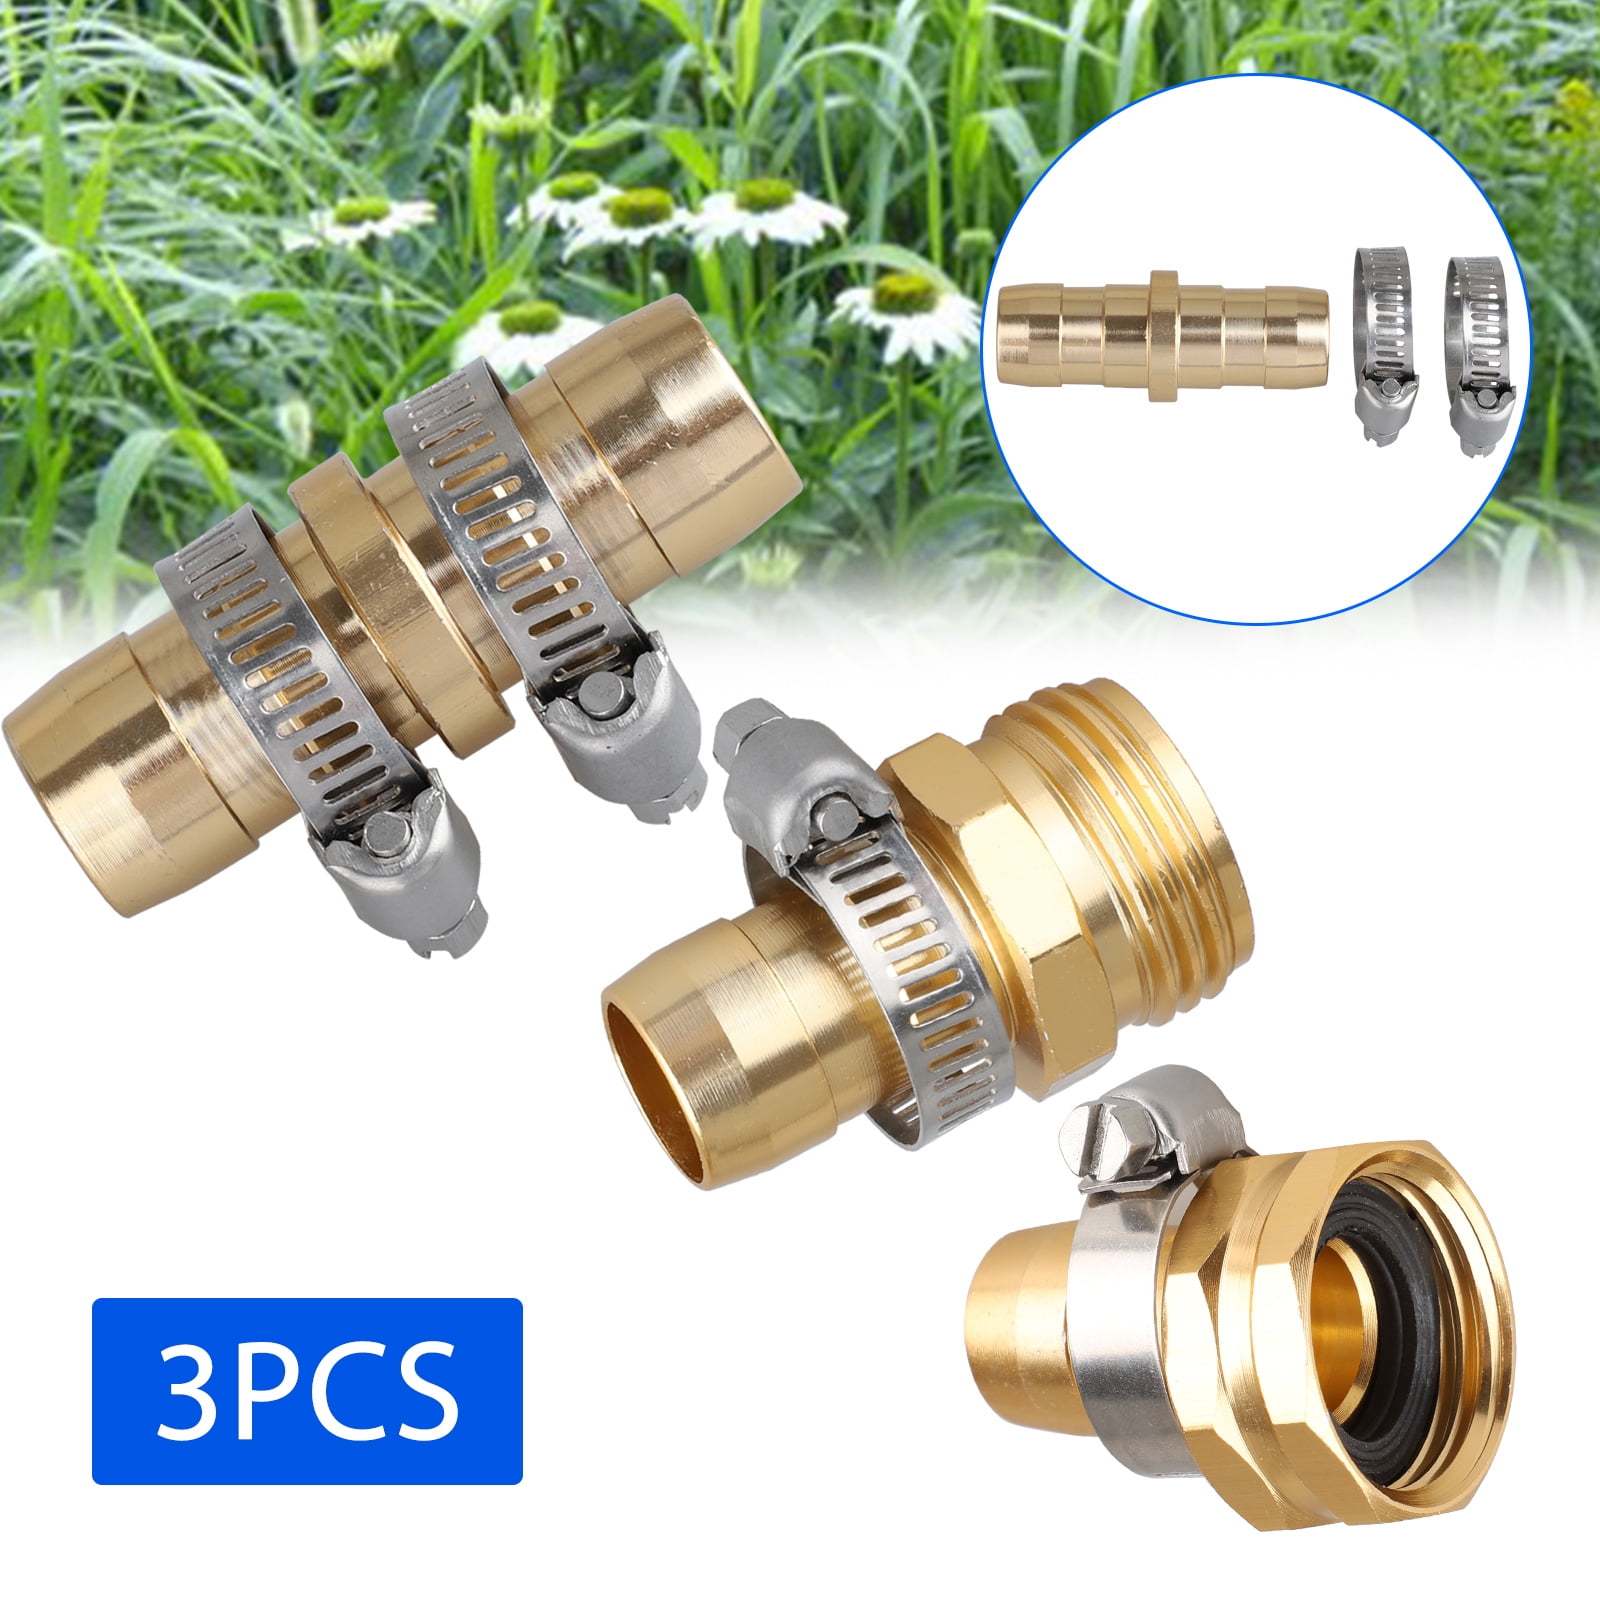 HIRALIY 2 Pack 5/8 Solid Brass Barb x US Standard 3/4 Female Thread Connector Fitting Garden Water Hose Repair Kit with Stainless Steel Hose Clamps 